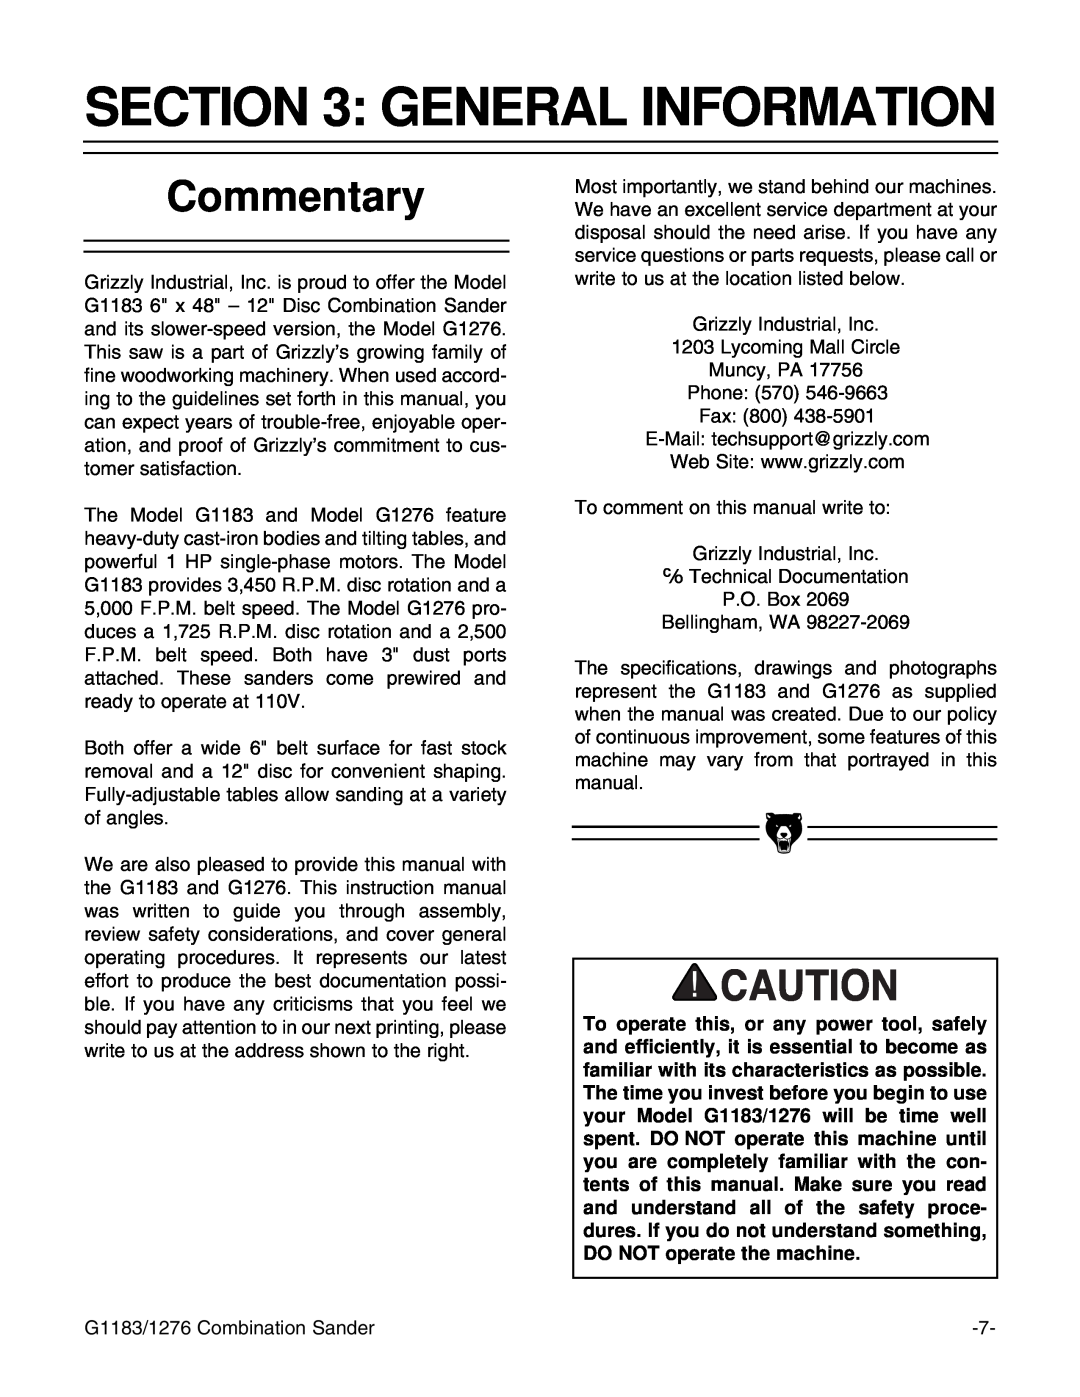 Grizzly G1276, G1183 instruction manual General Information, Commentary 